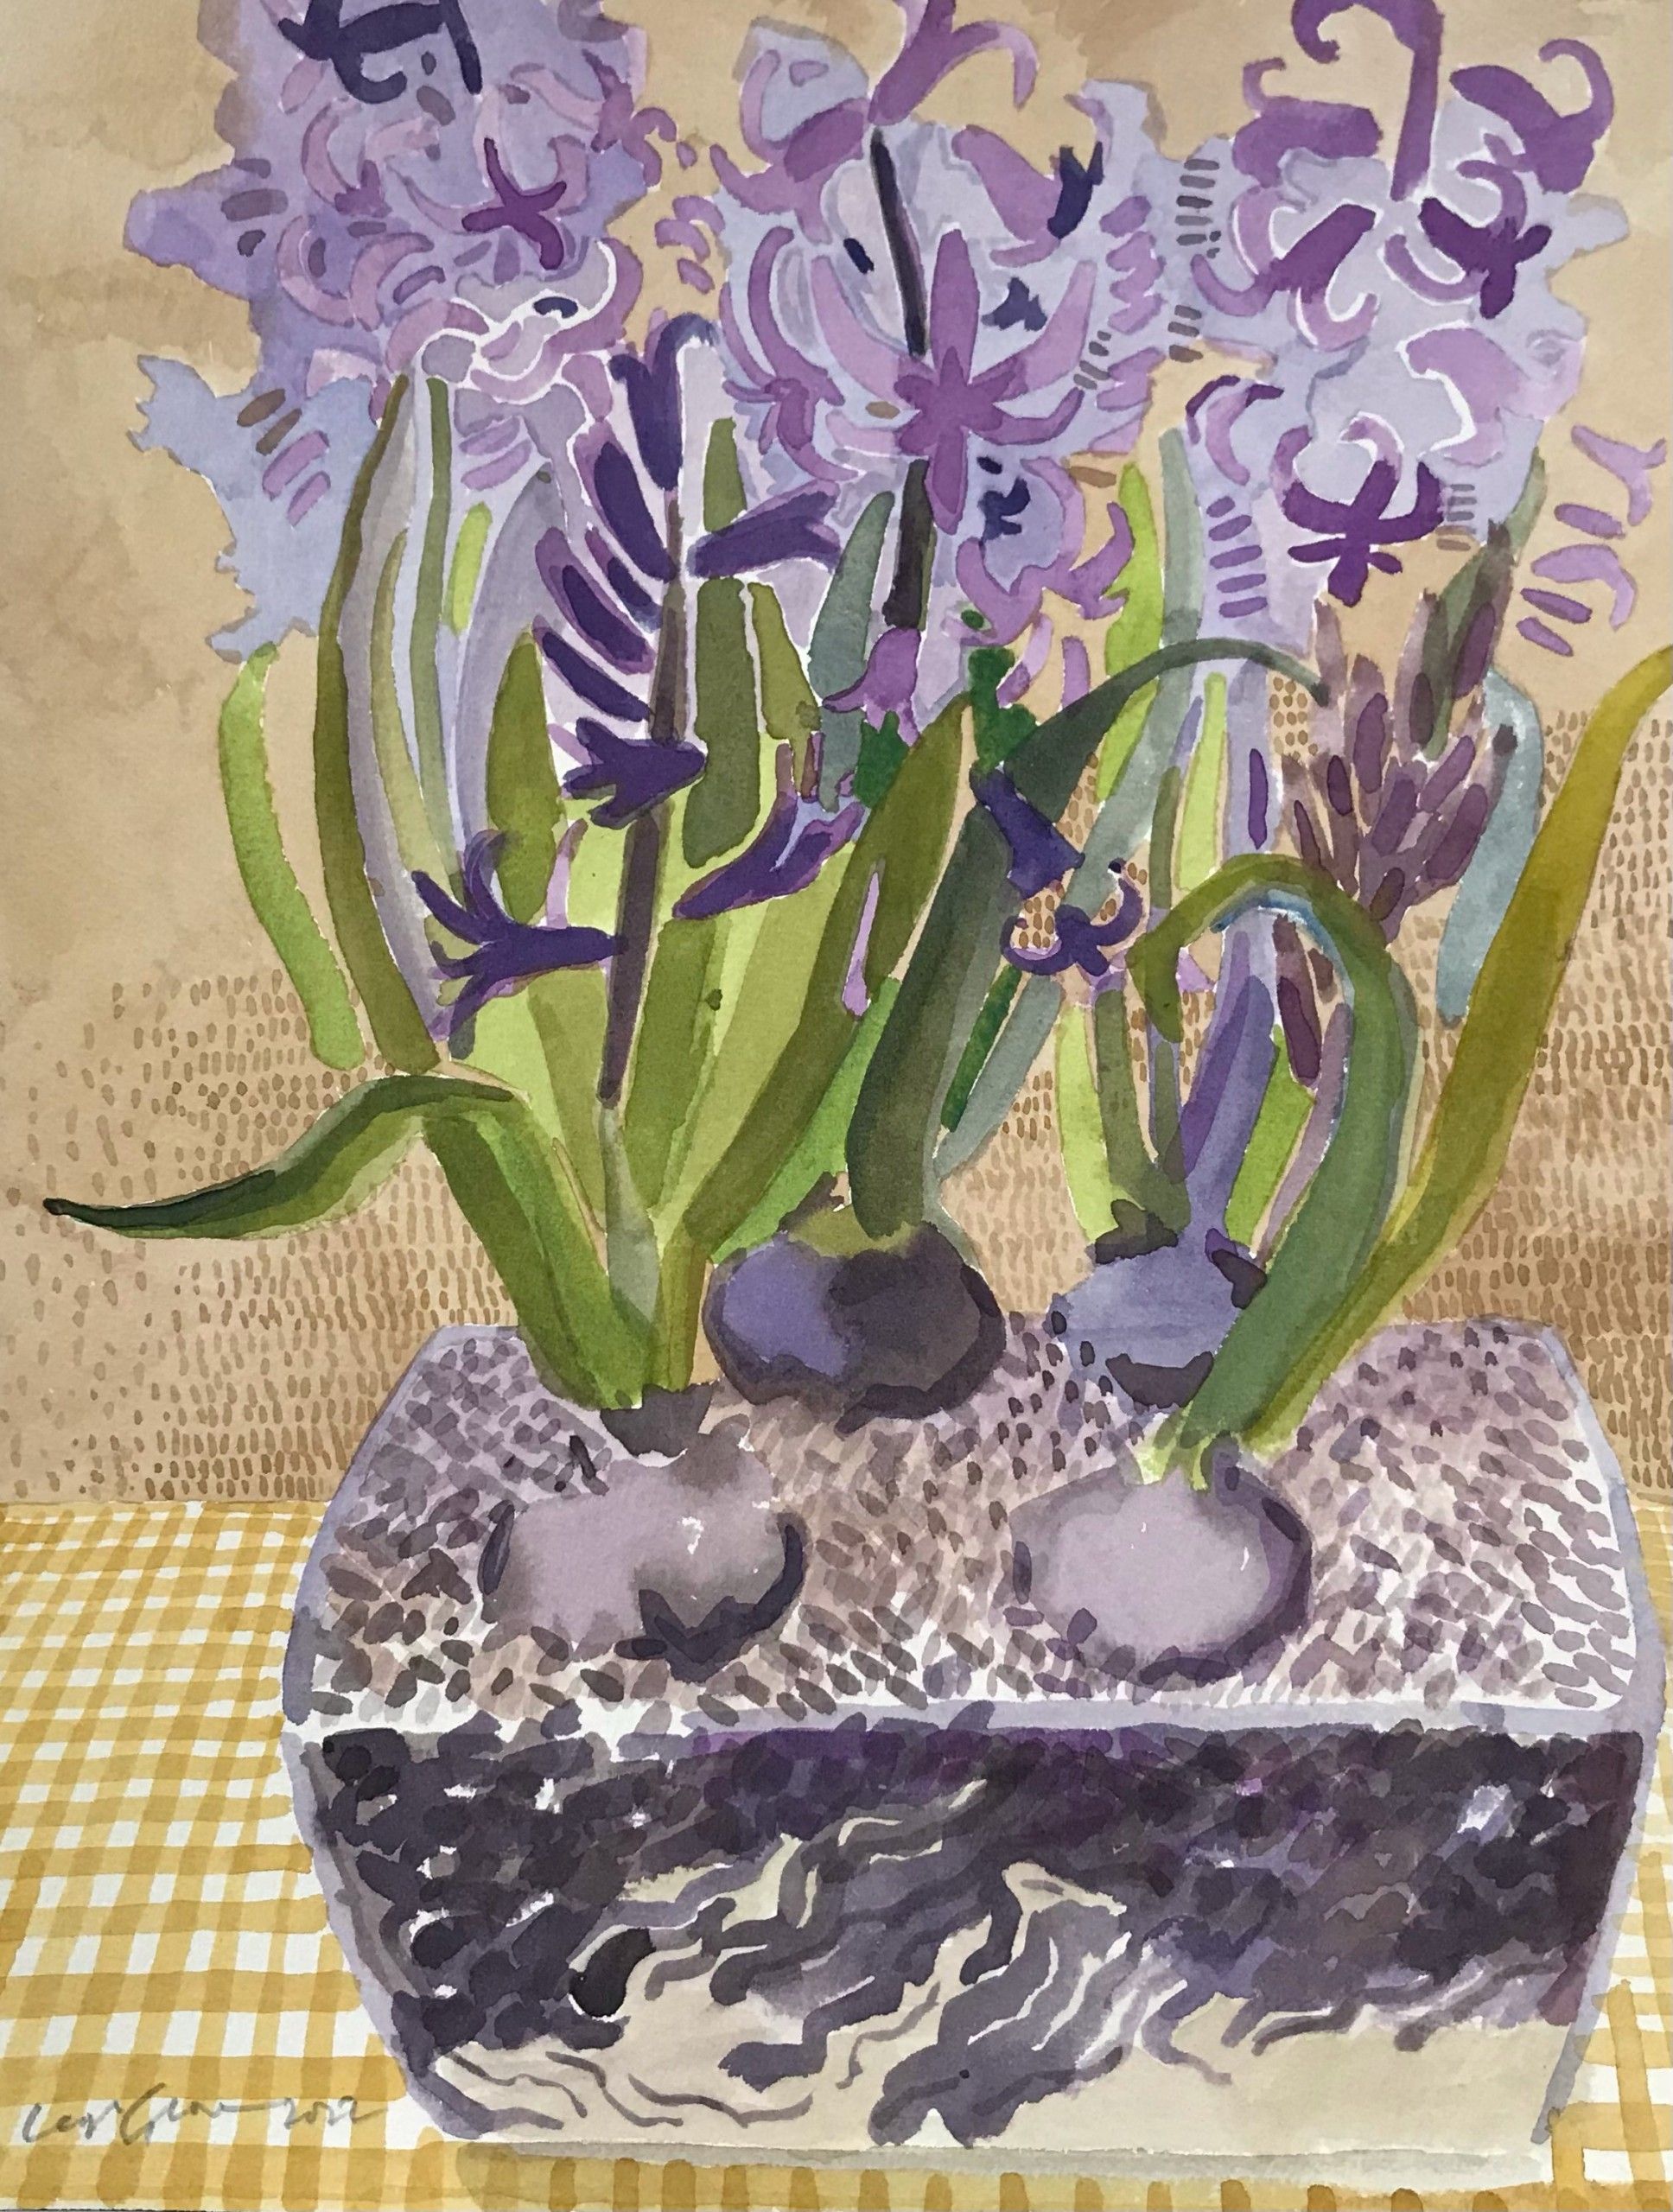 Hyacinth in glass vase by Leigh Glover